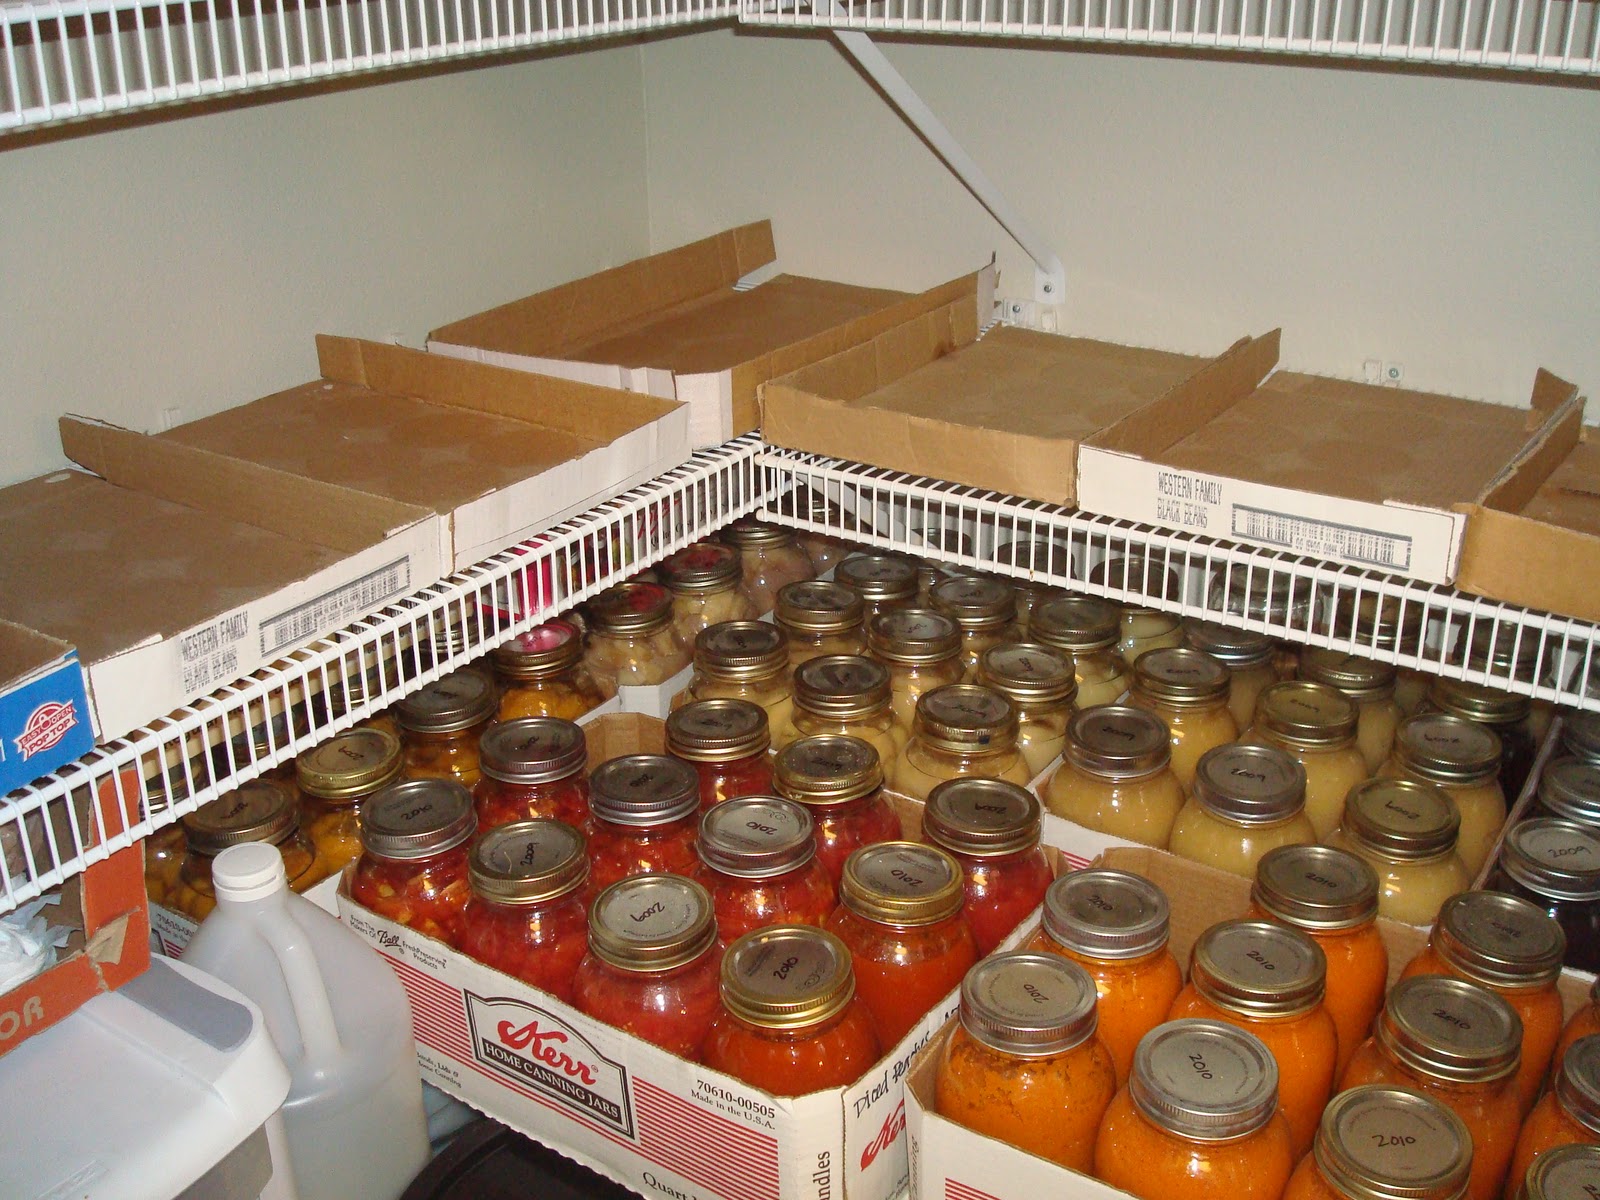 my family prepared: Maximize your Pantry